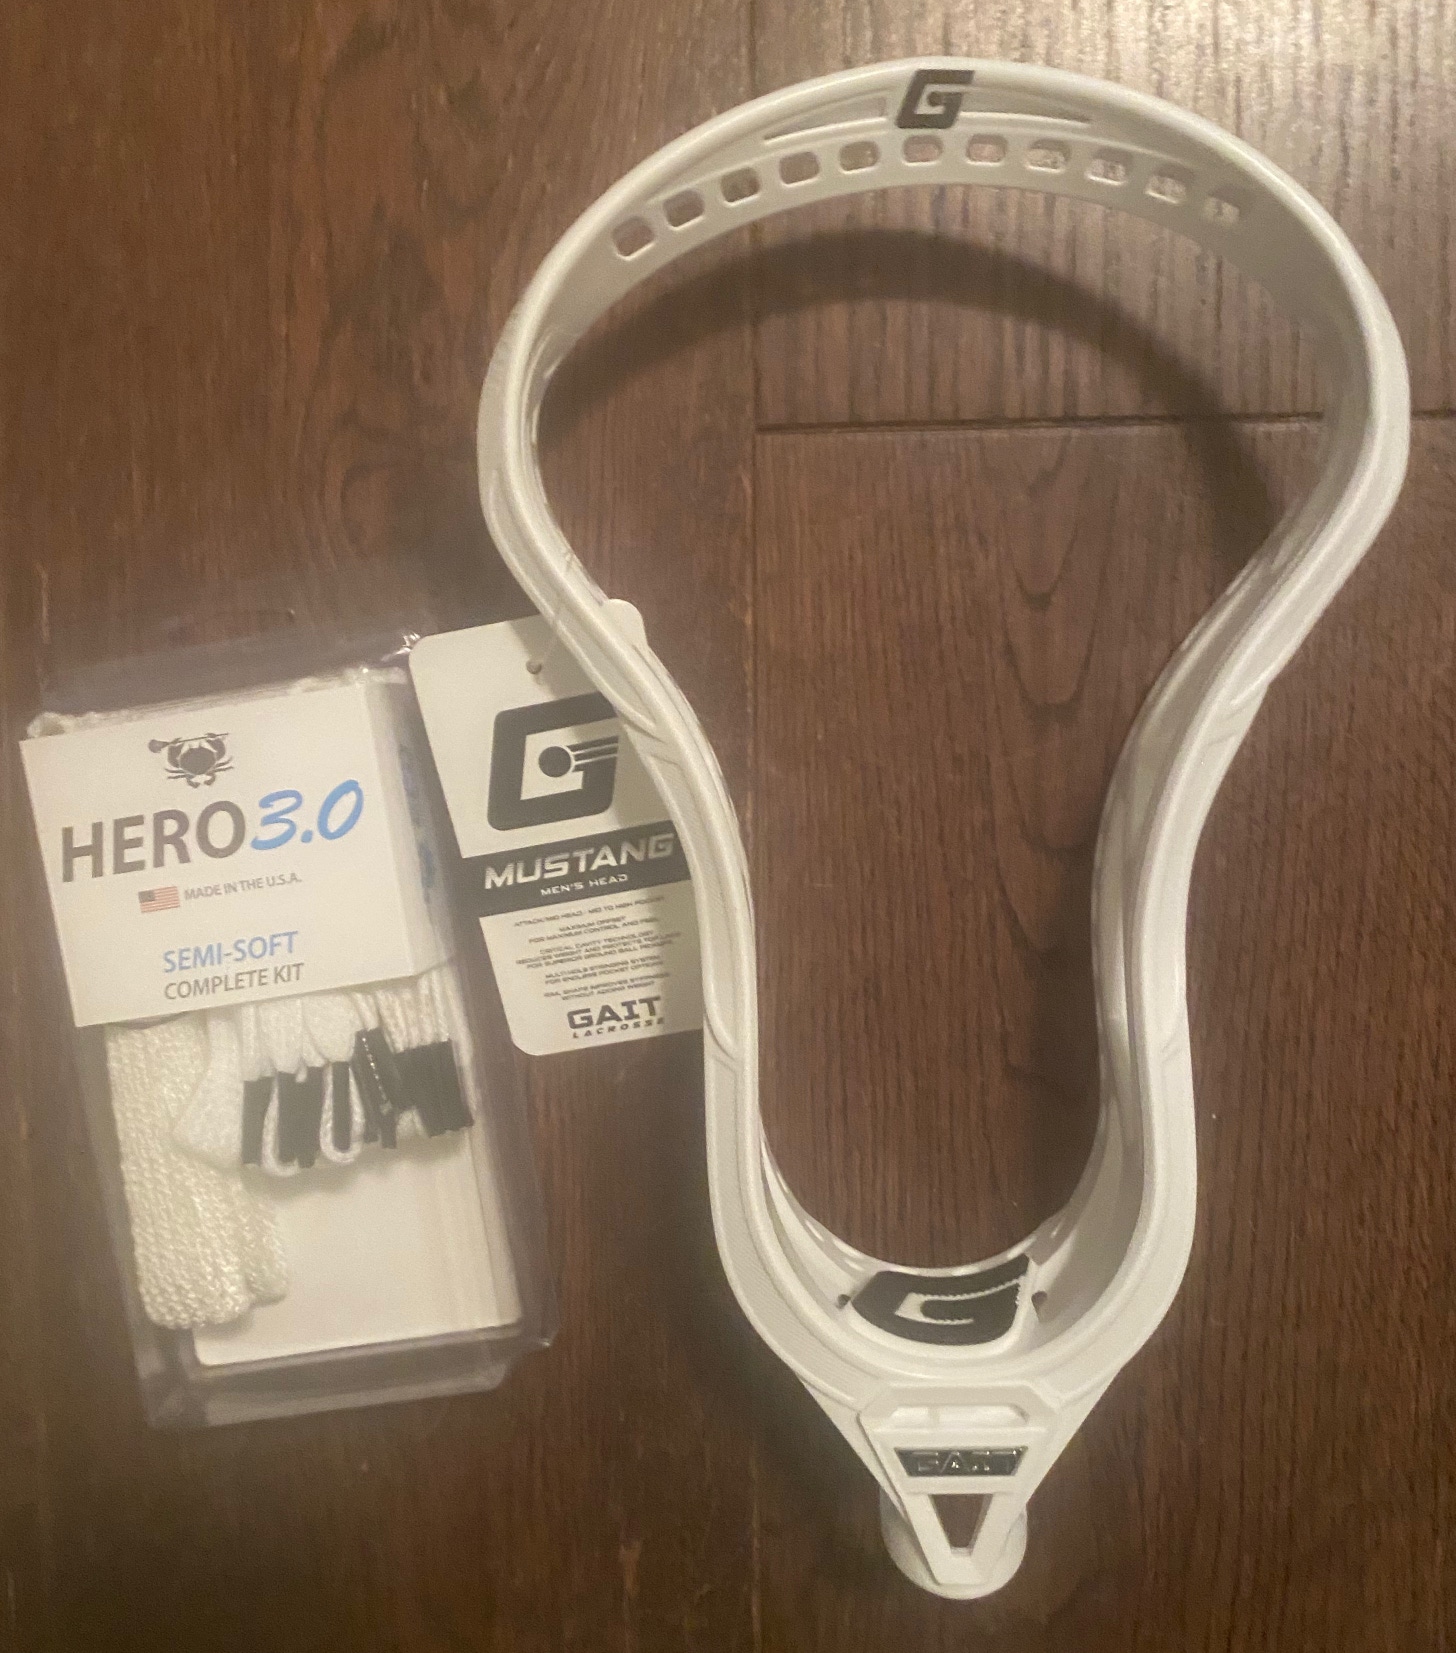 New! Gait Mustang Lacrosse Head with Hero 3.0 complete Mesh kit valued at $32.99!